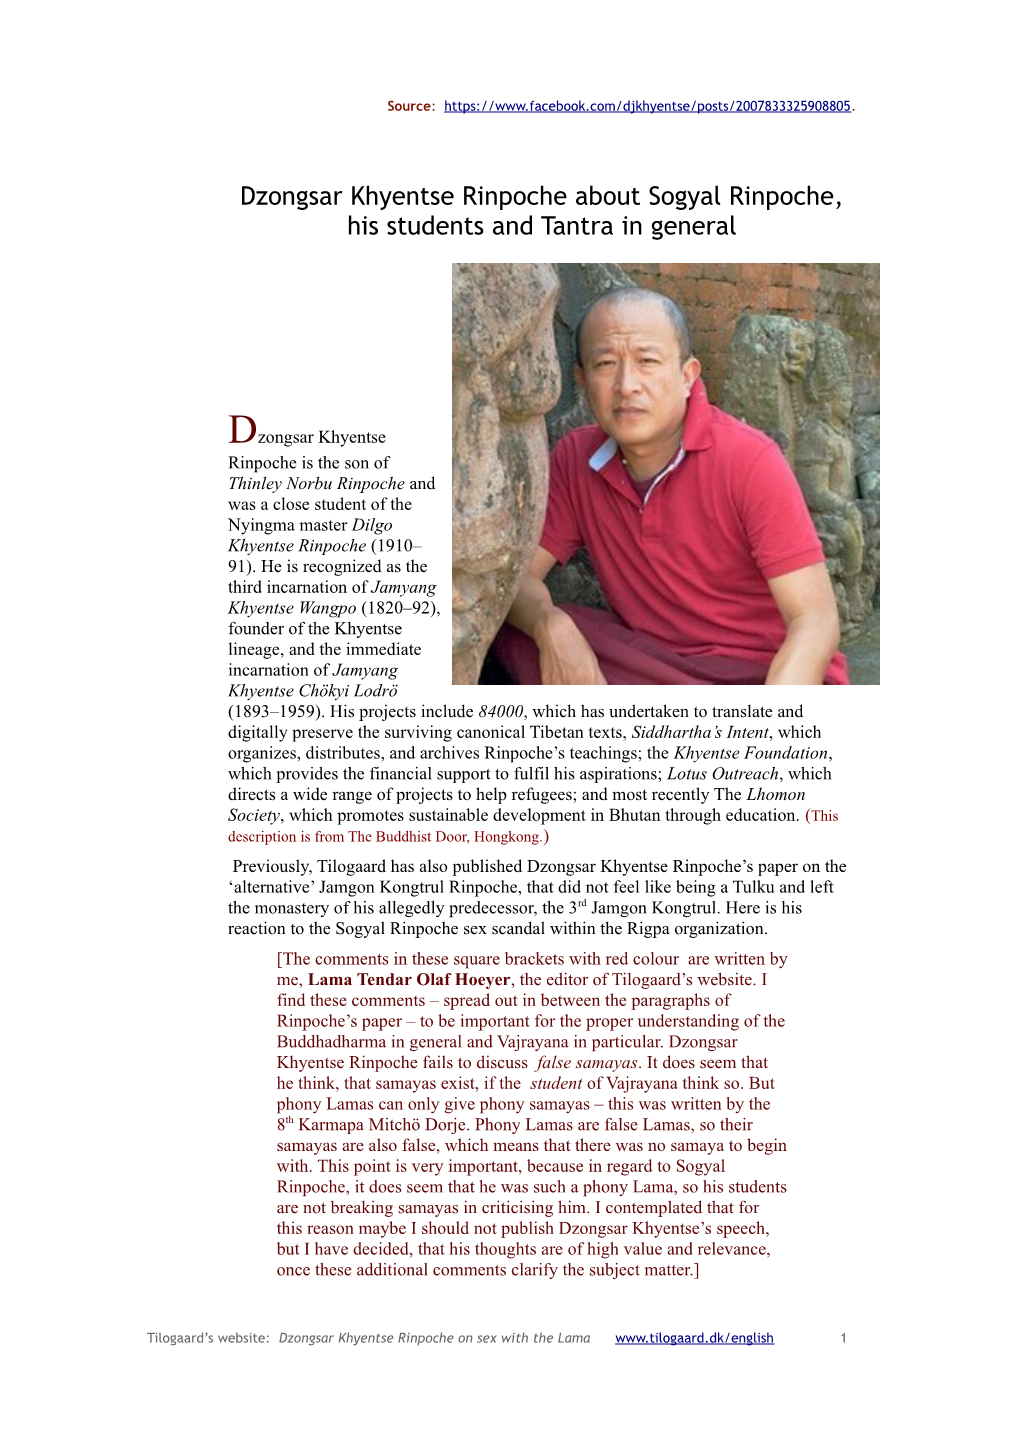 Dzongsar Khyentse Rinpoche About Sogyal Rinpoche, His Students and Tantra in General